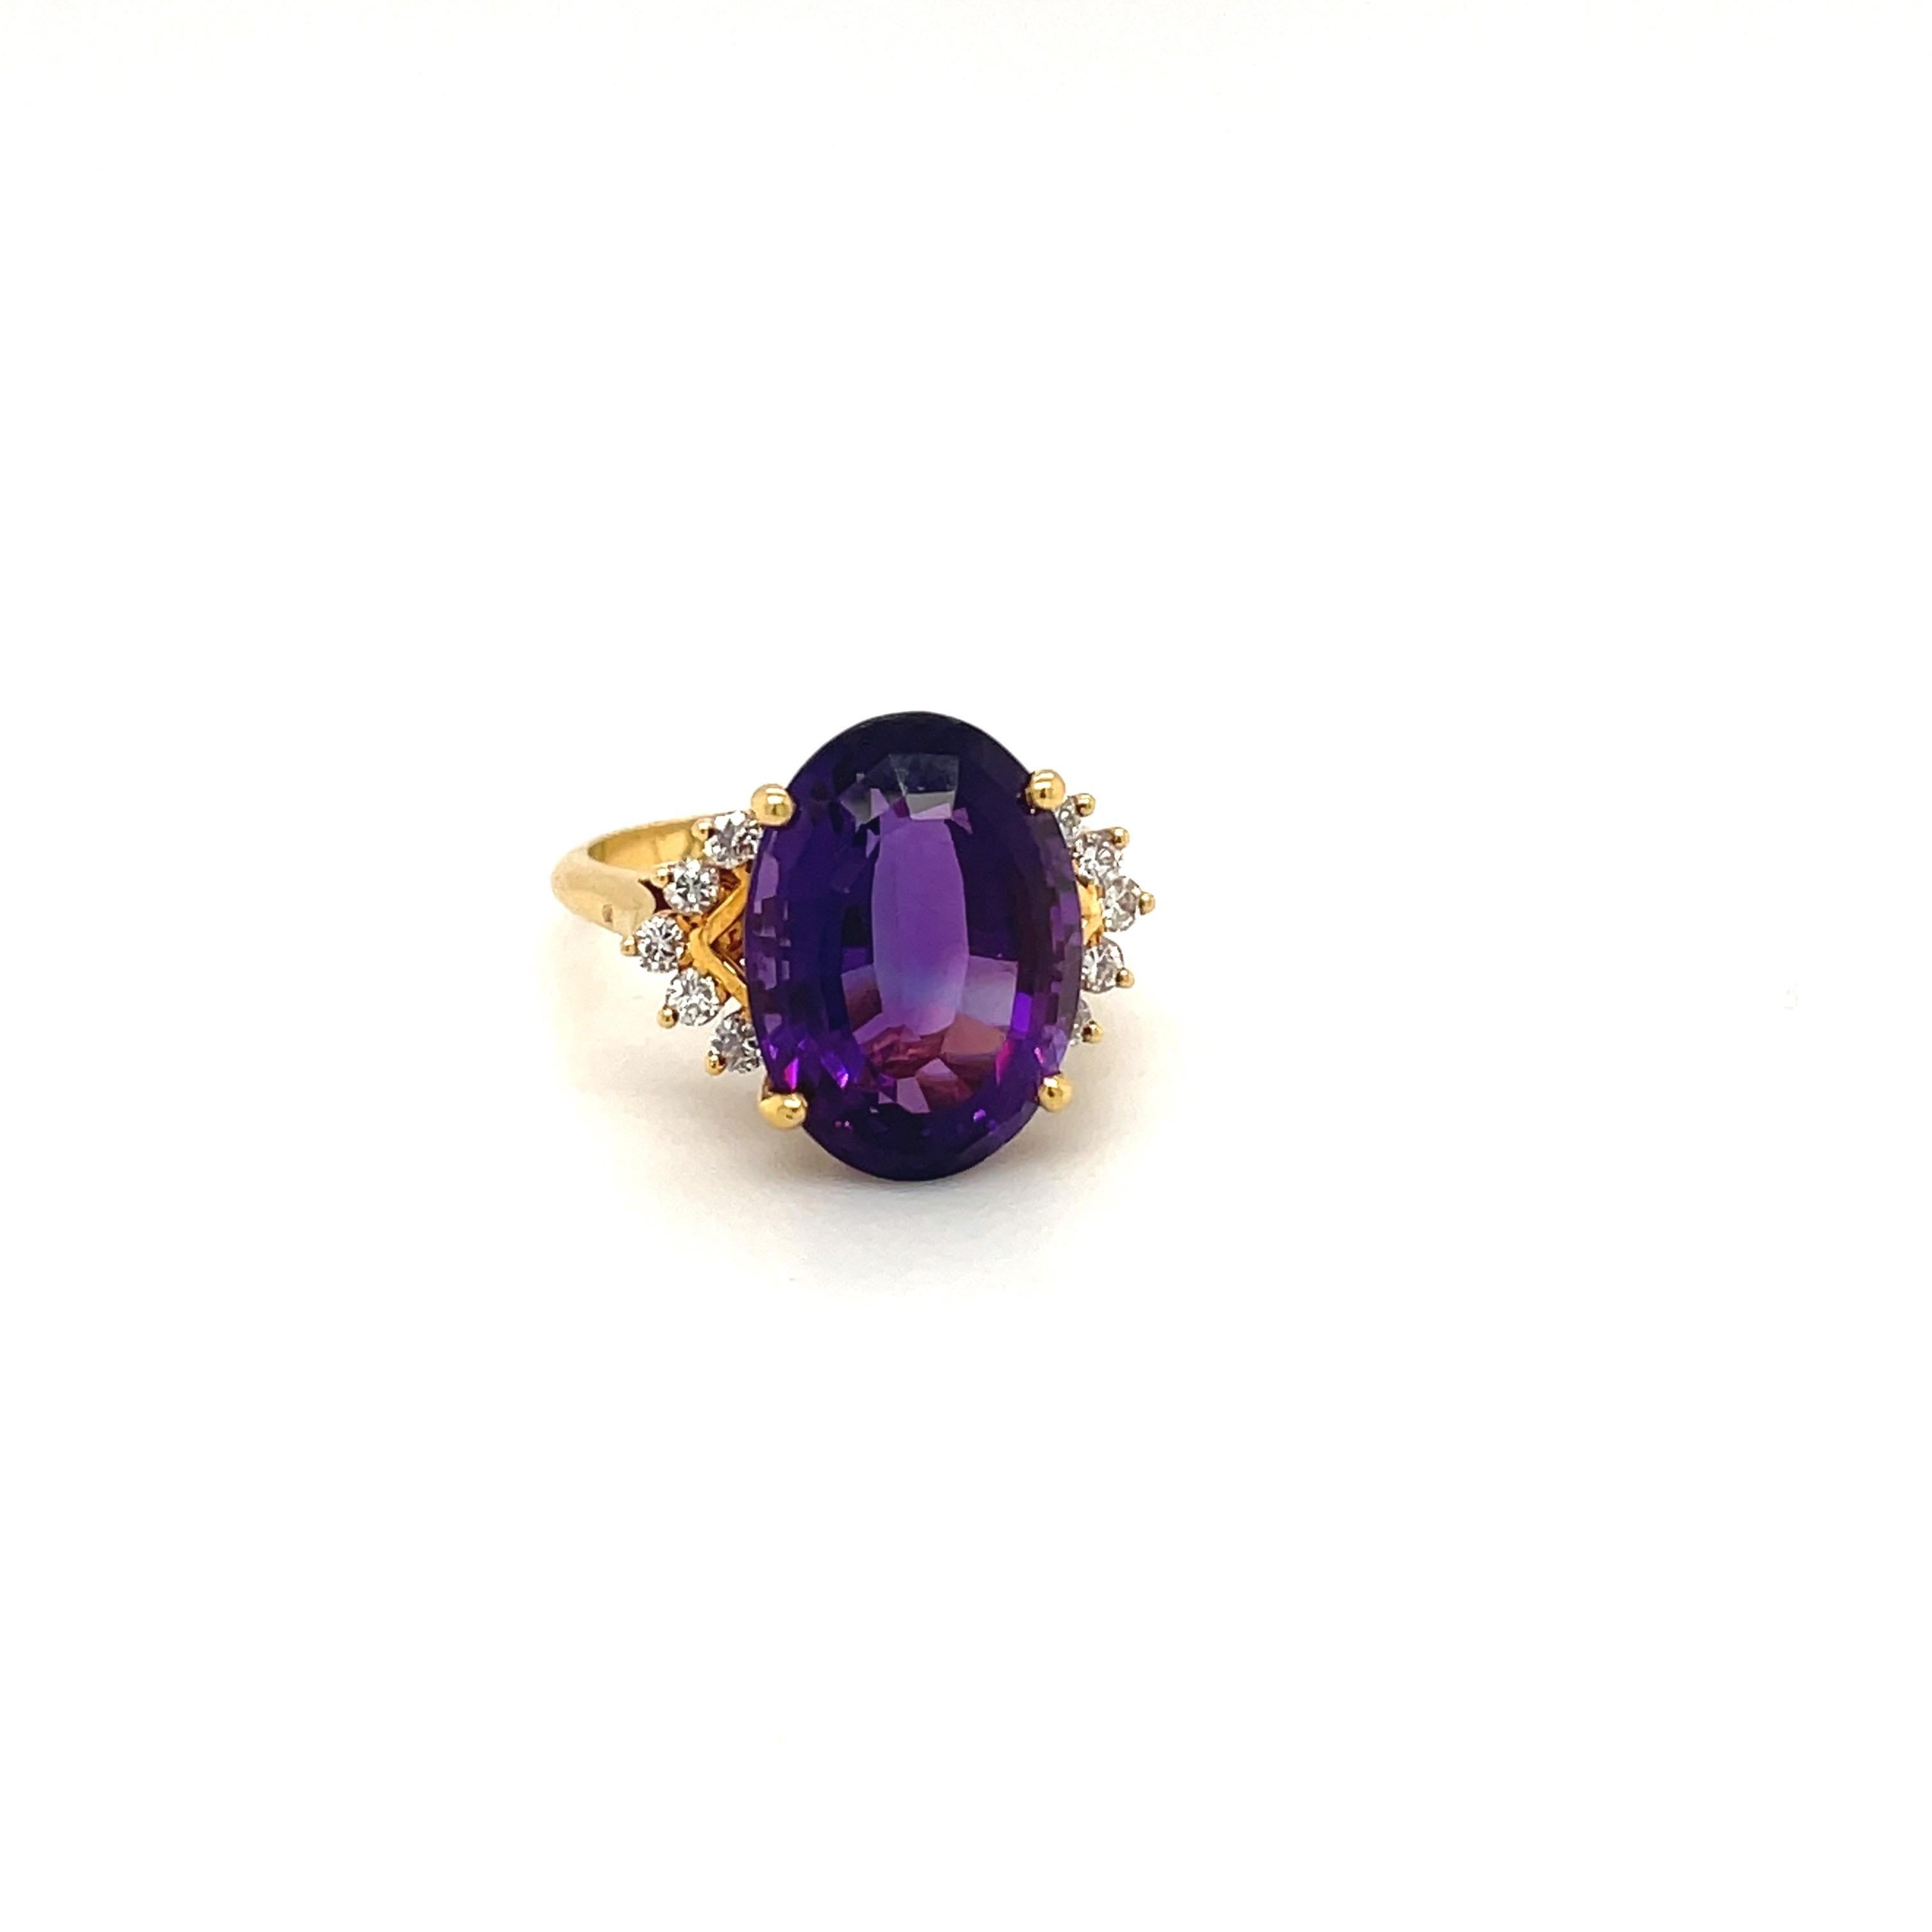 Classic 18 karat yellow gold ring set with a beautiful intense oval amethyst center. The large oval is flanked by 10 round brilliant diamonds. 
Amethyst 7.24 carats
Diamonds 0.76 carats
Stamped 18K with the jewelers hallmark
Ring size 8.25 sizing